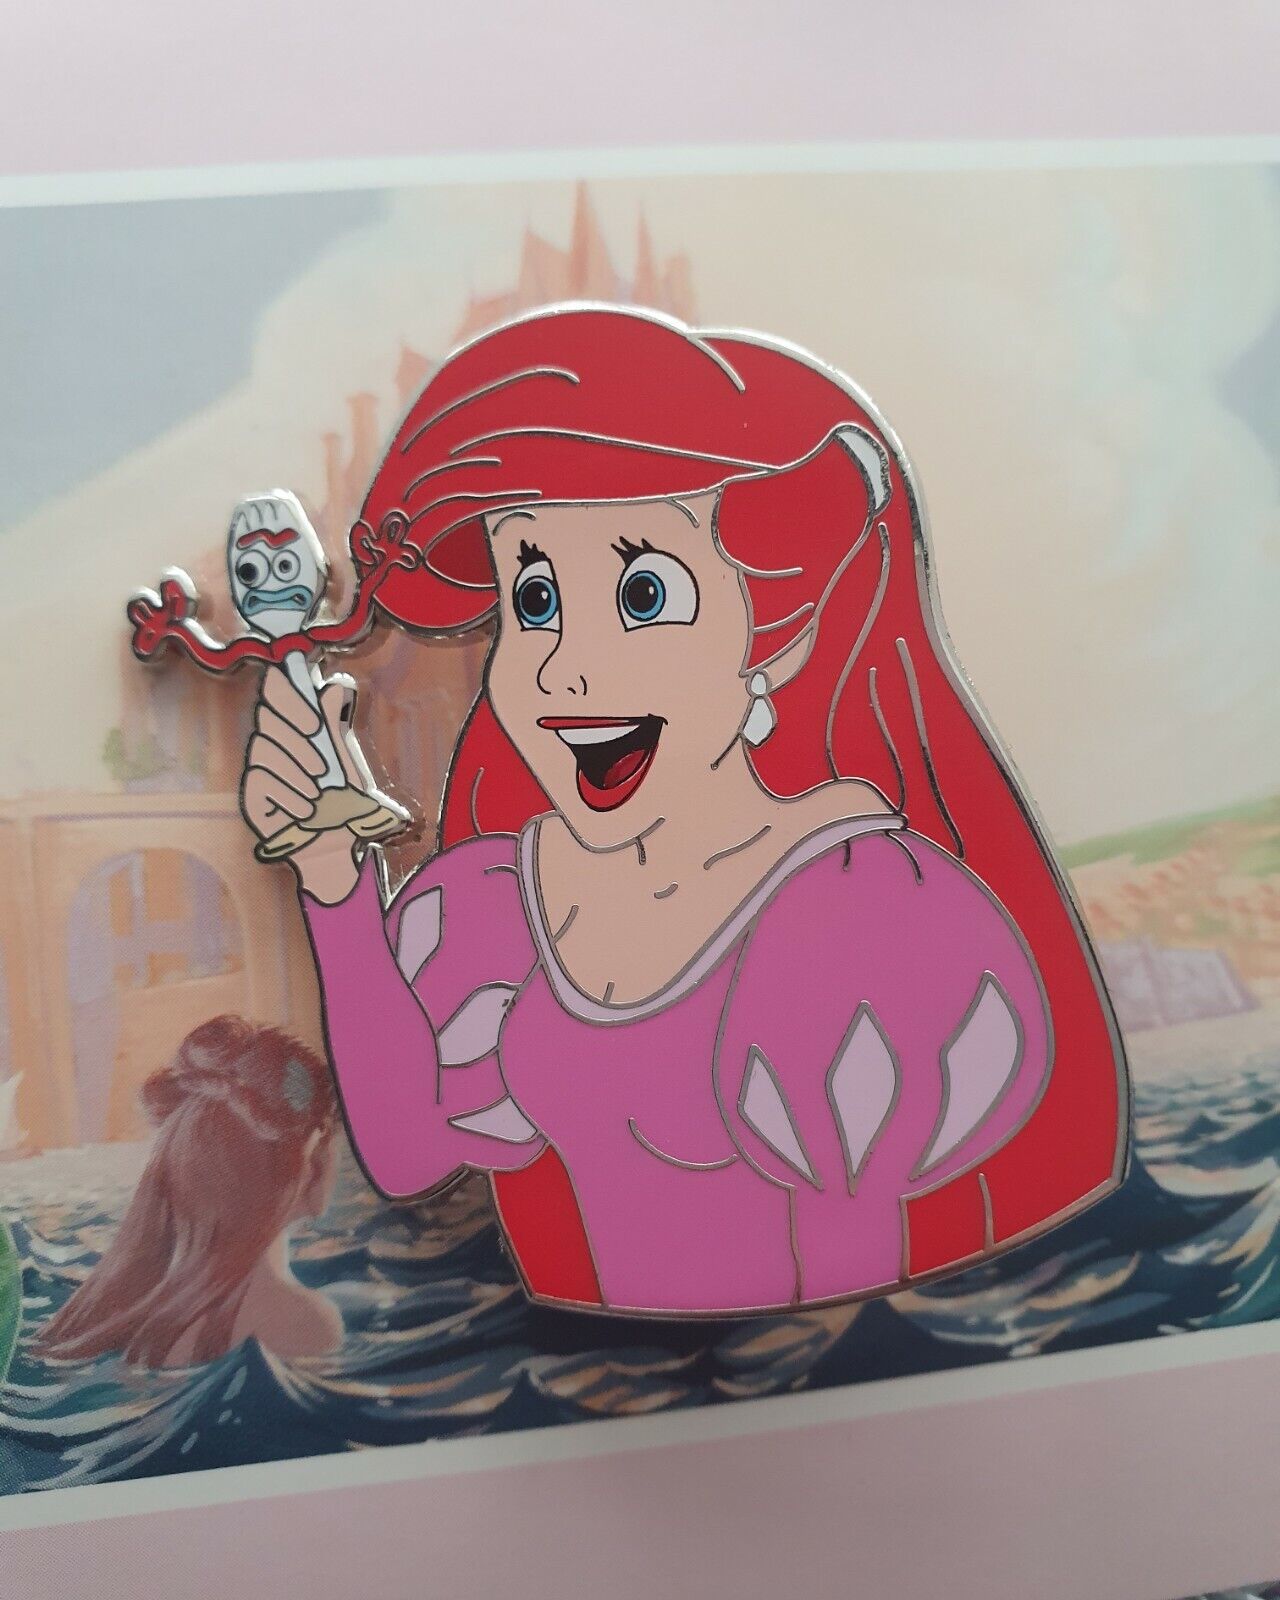 Disney Fantasy Pin Ariel Pink Dress The Little Mermaid & Toy Story Mash Up Forky